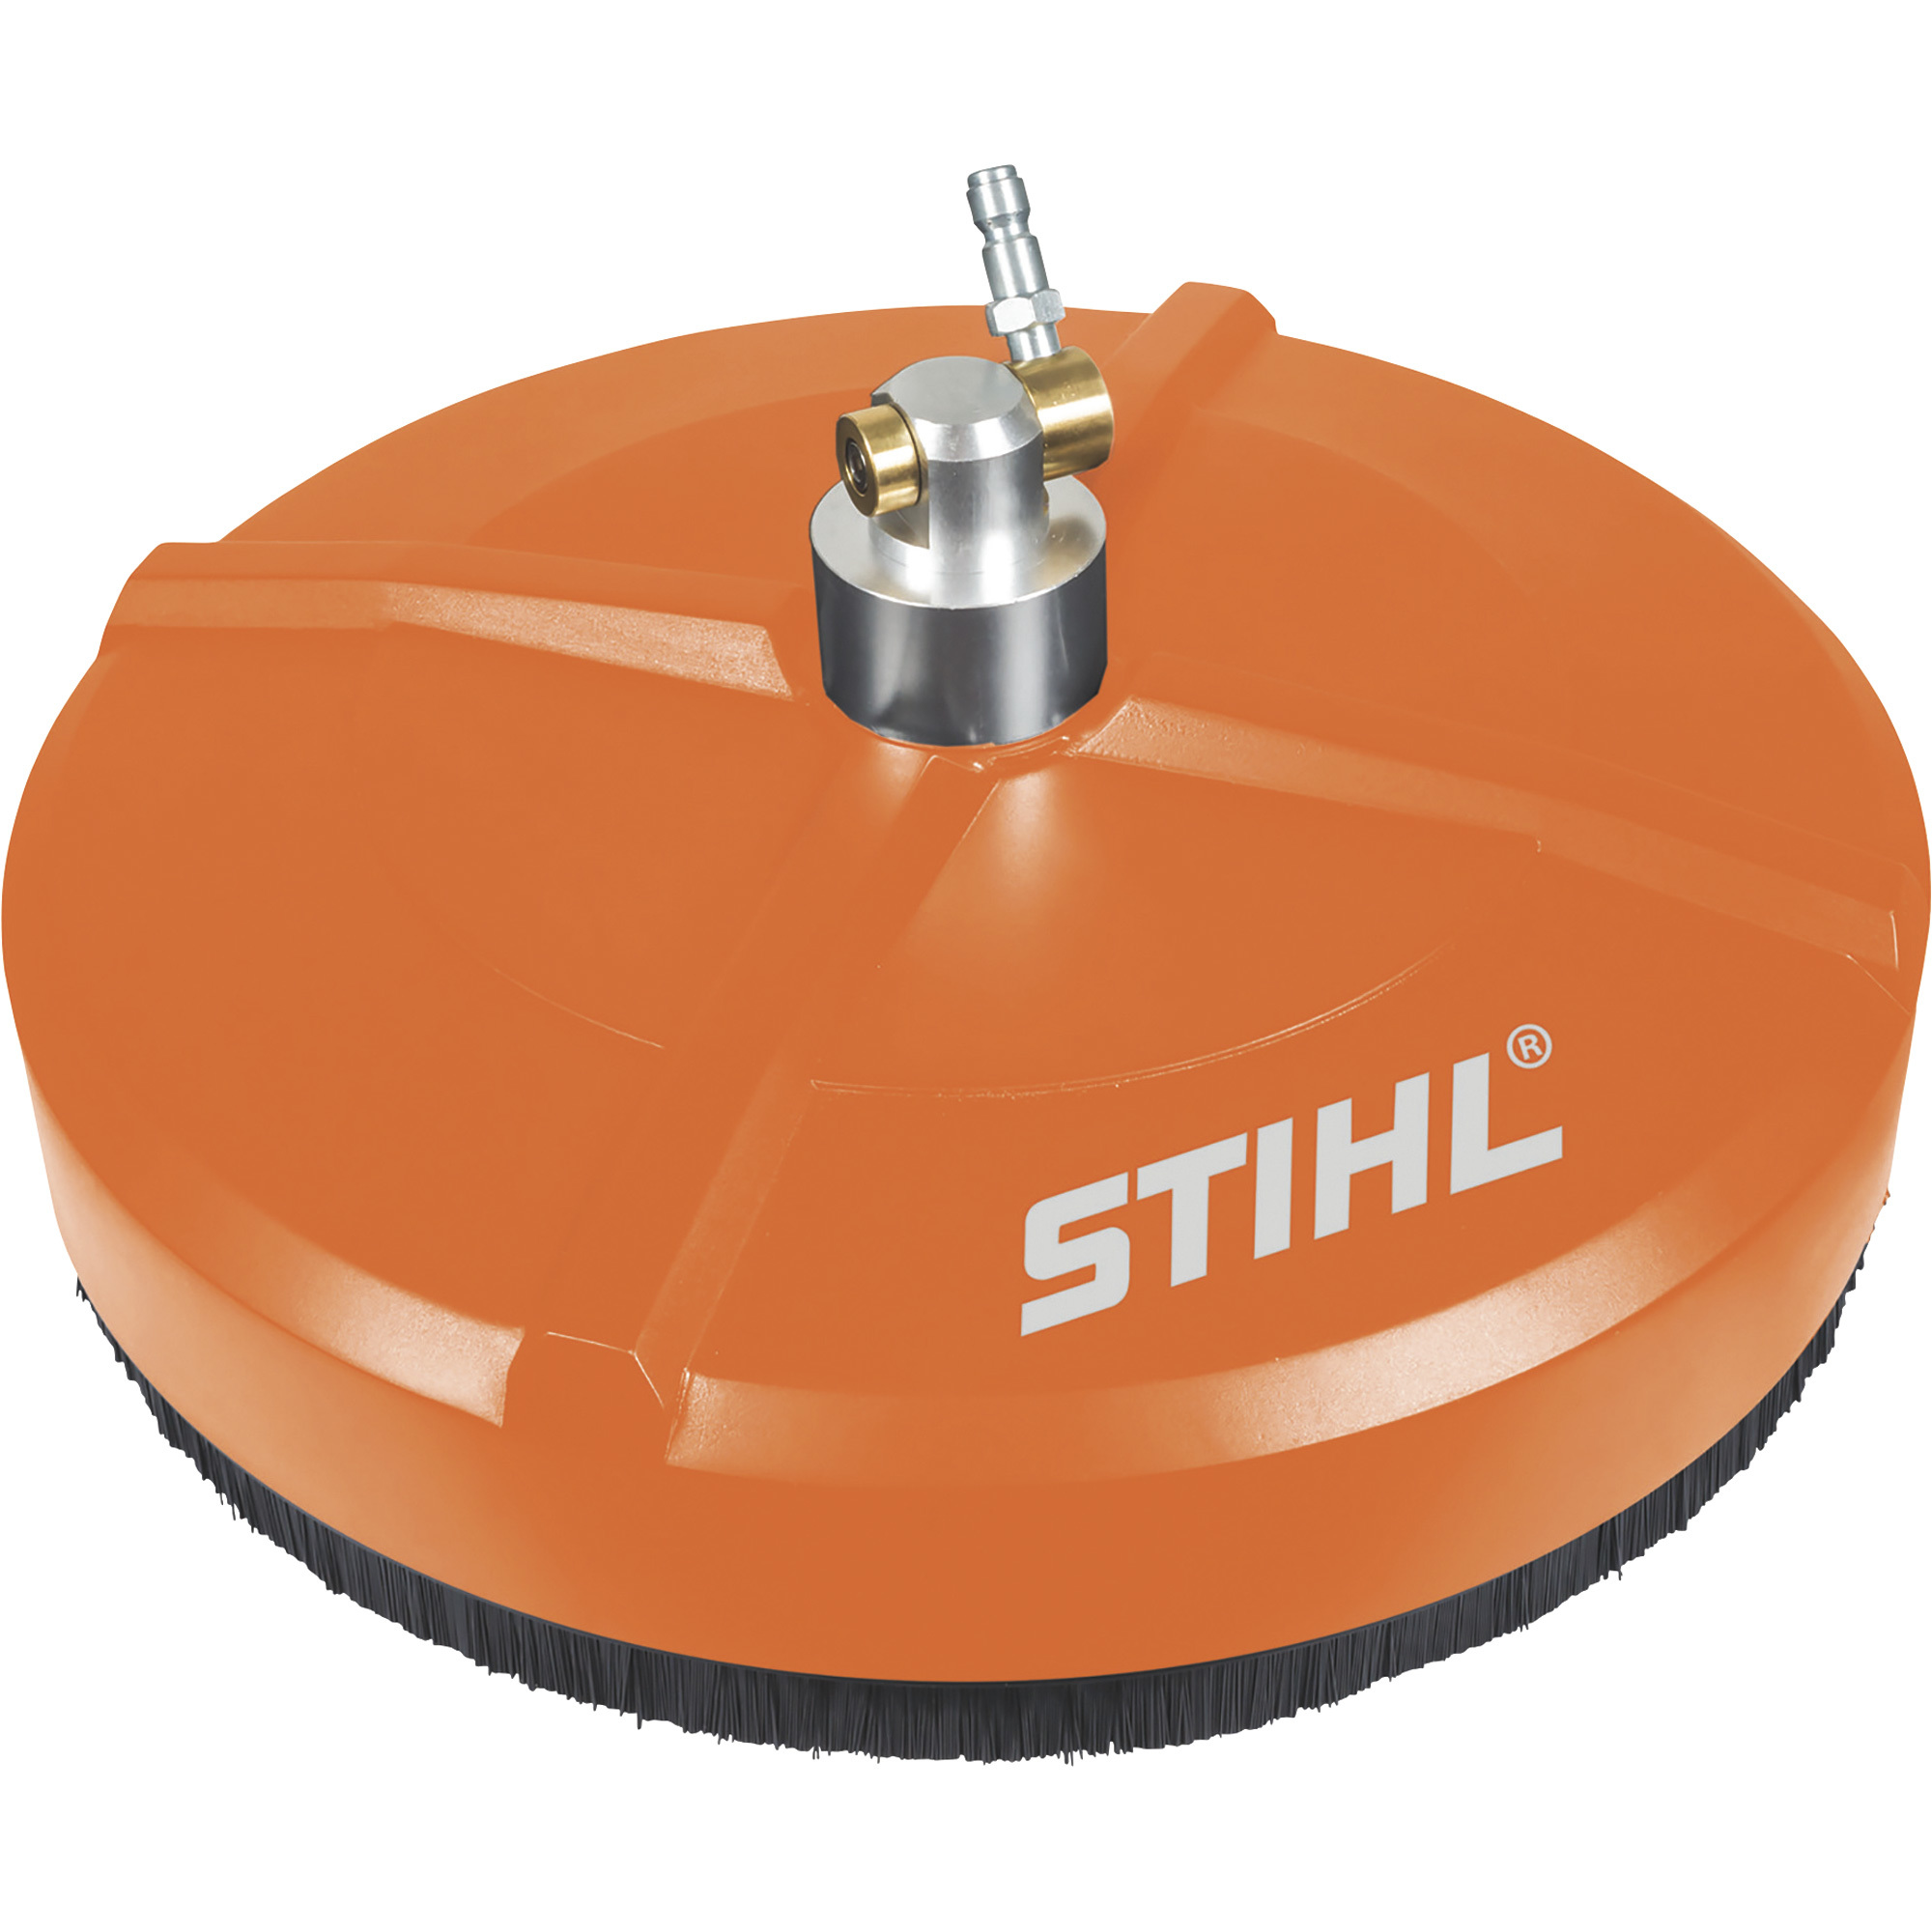 Stihl Rotary Pressure Washer Surface Cleaner â 14Inch Diameter, Model 4900 500 3904